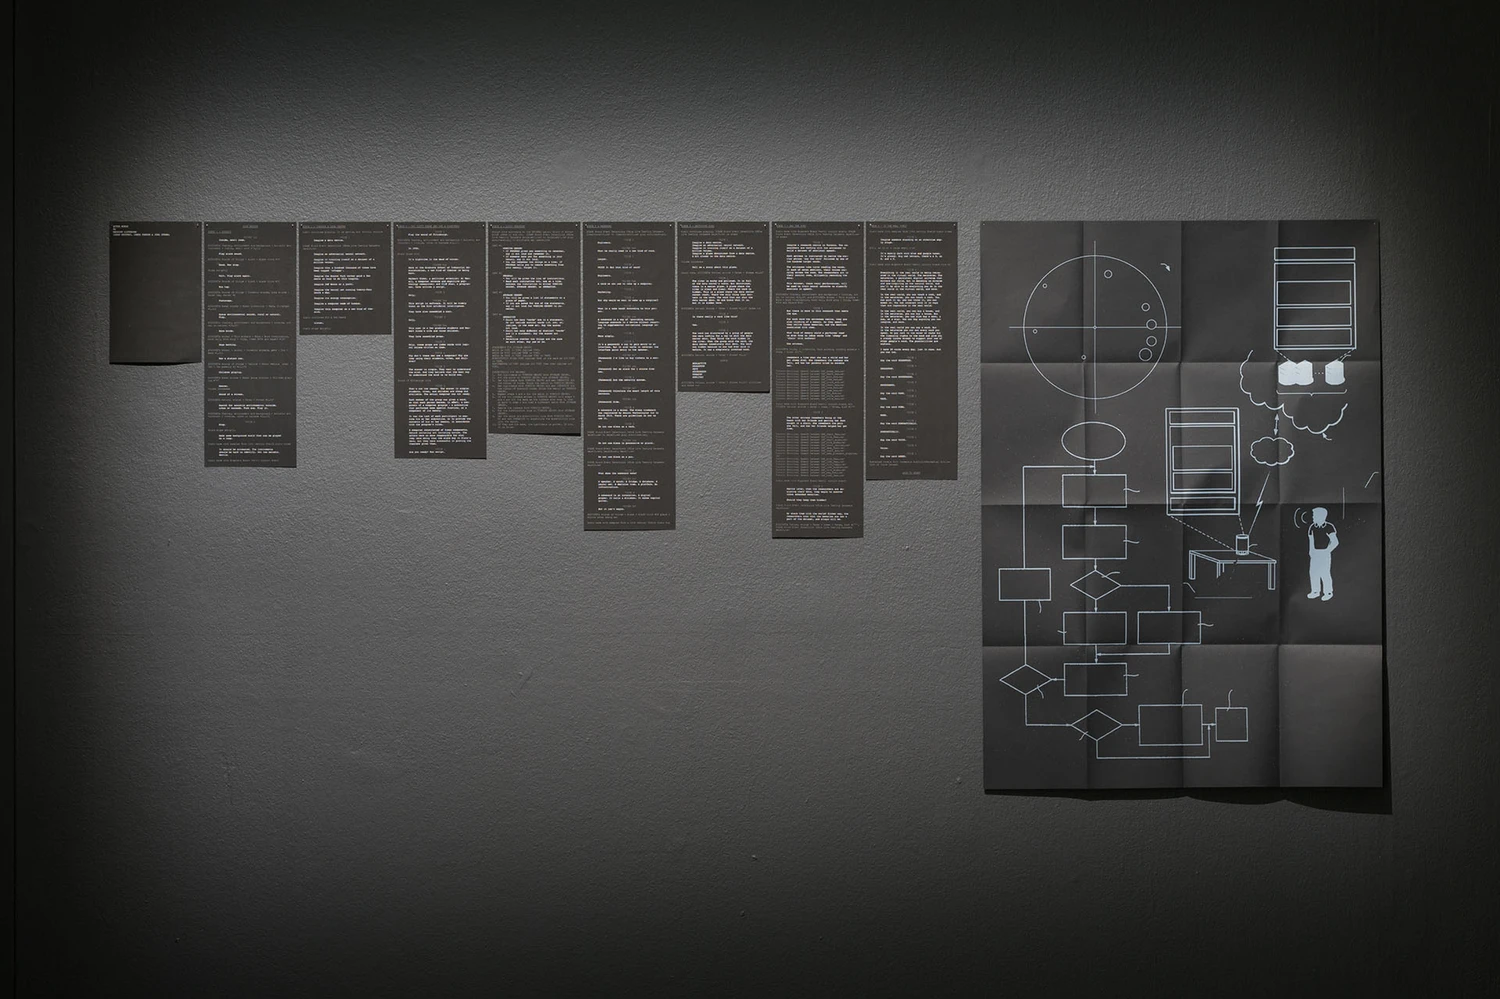 On a slate-coloured wall, pieces of dark grey paper are arranged, hanging in a row. All different lengths, the top edges are aligned, with paragraphs of white text transcribing the audio from Machine Listening’s sound work After words. A much larger diagram sits to the right, showing a complicated flowchart connecting rectangles, diamonds, and ovals. Next to the flowchart is a drawing of a desk and a figure looking on, with hands on hips. Thought bubbles float overhead.